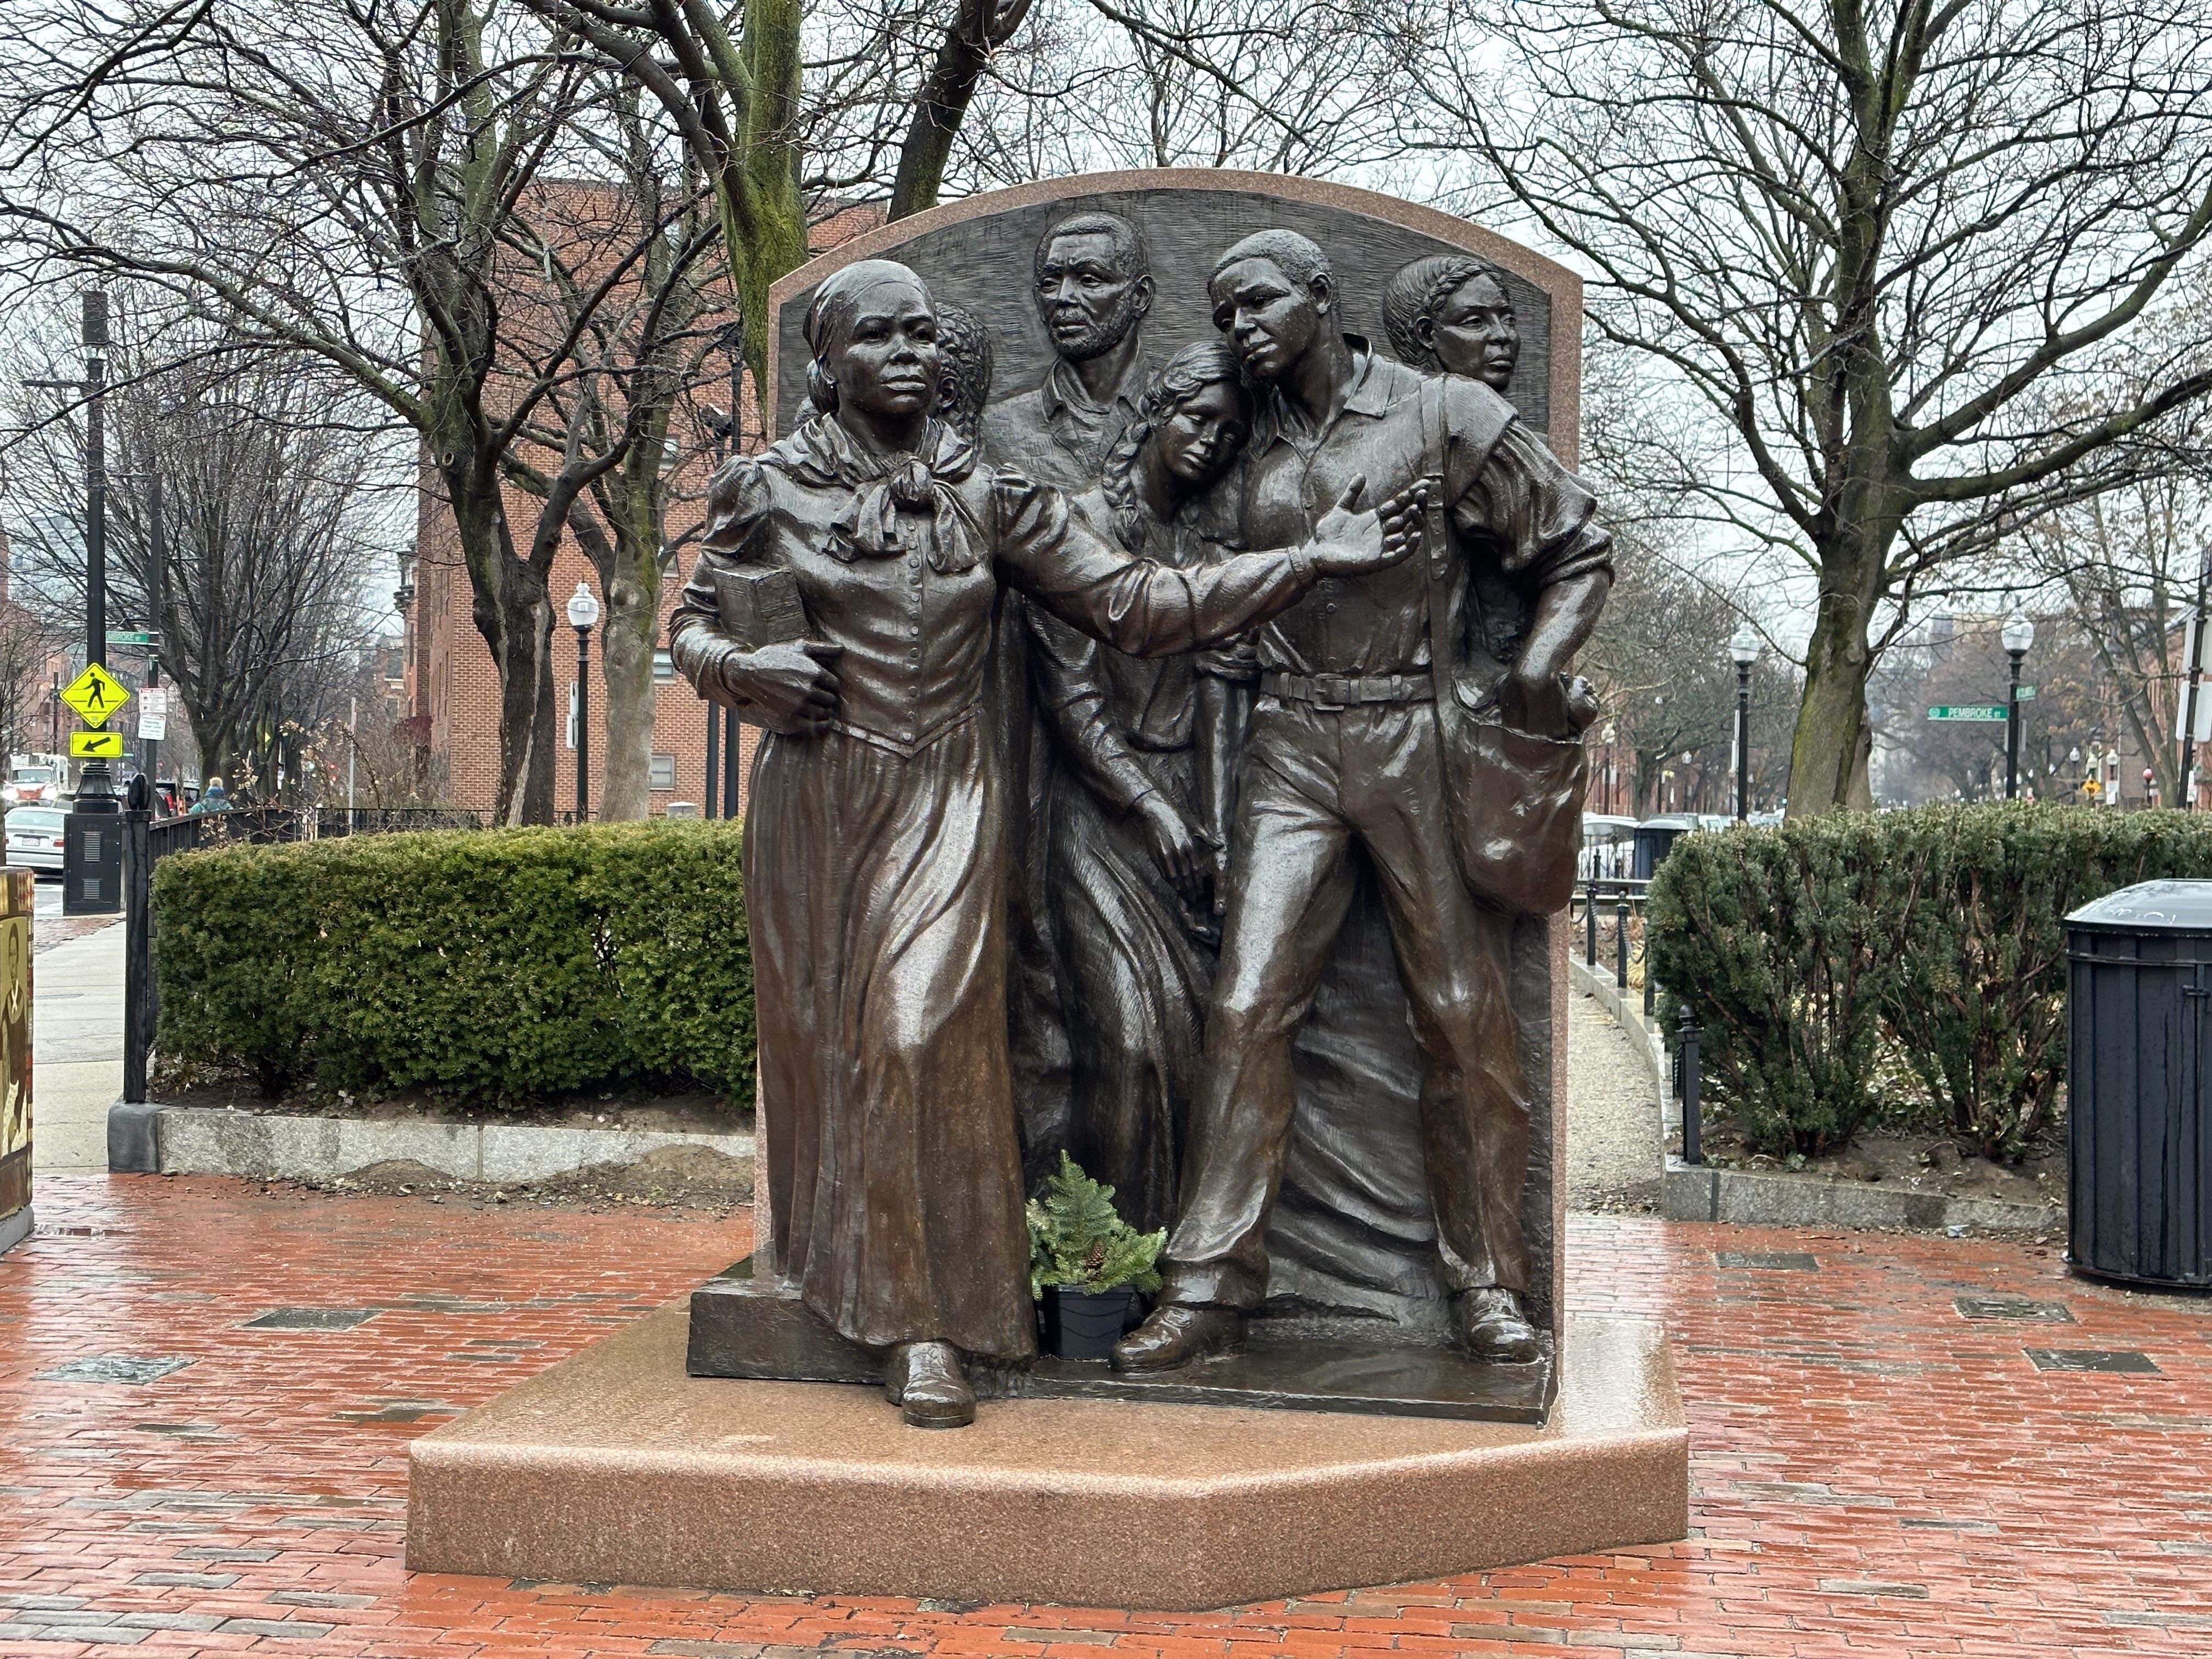 A 10-foot-tall bronze statue in Harriet Tubman Square in the south Ends pictures Harriet Tubman standing in front of four enslaved people, as she helps them escape.